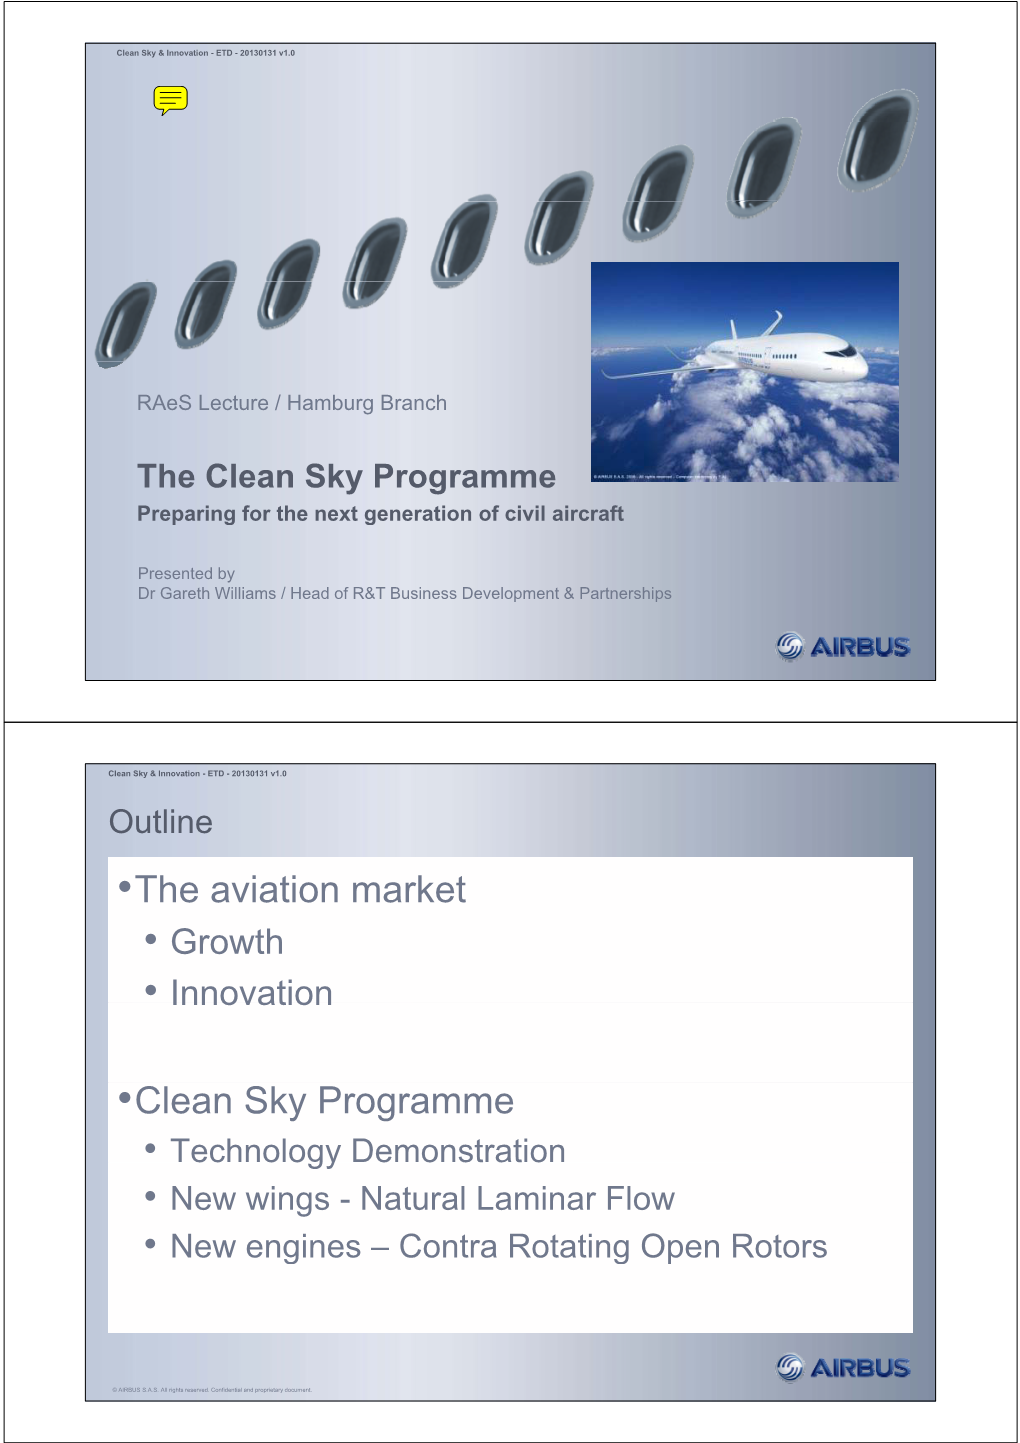 The Clean Sky Programme Preppgaring for the Next G Eneration of Civil Aircraft